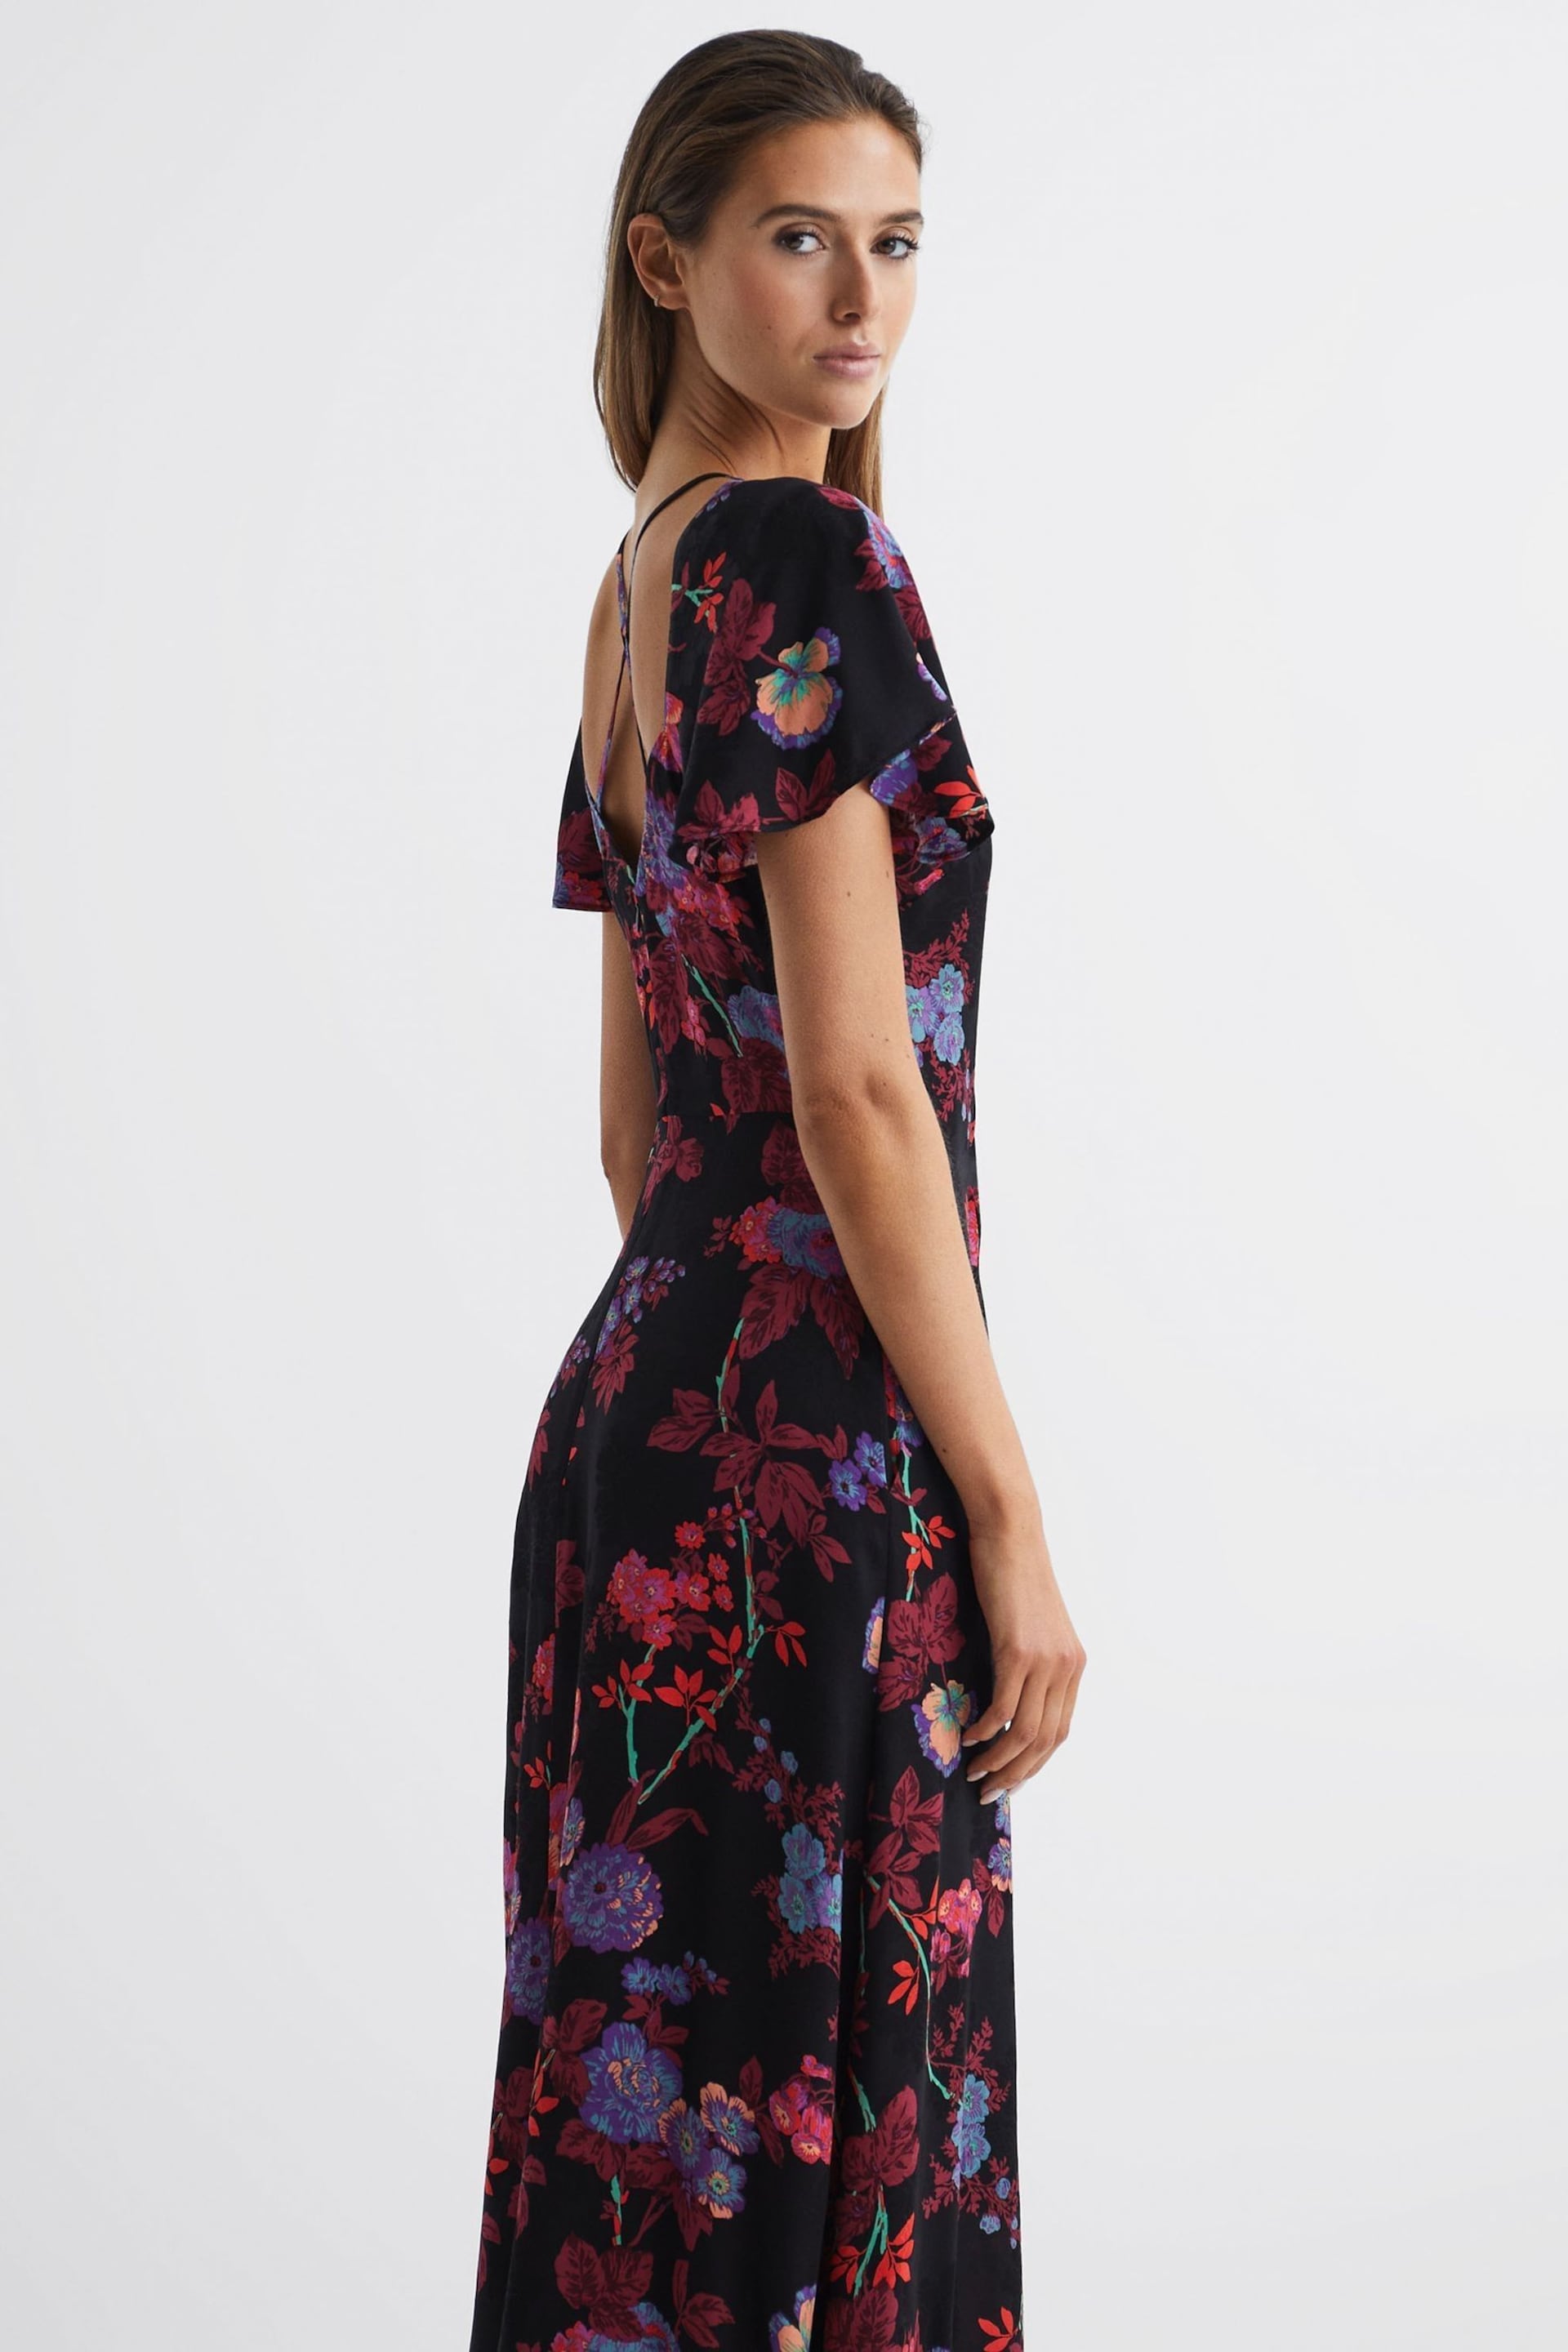 Reiss Black/Pink Leni Fitted Floral Print Midi Dress - Image 7 of 7